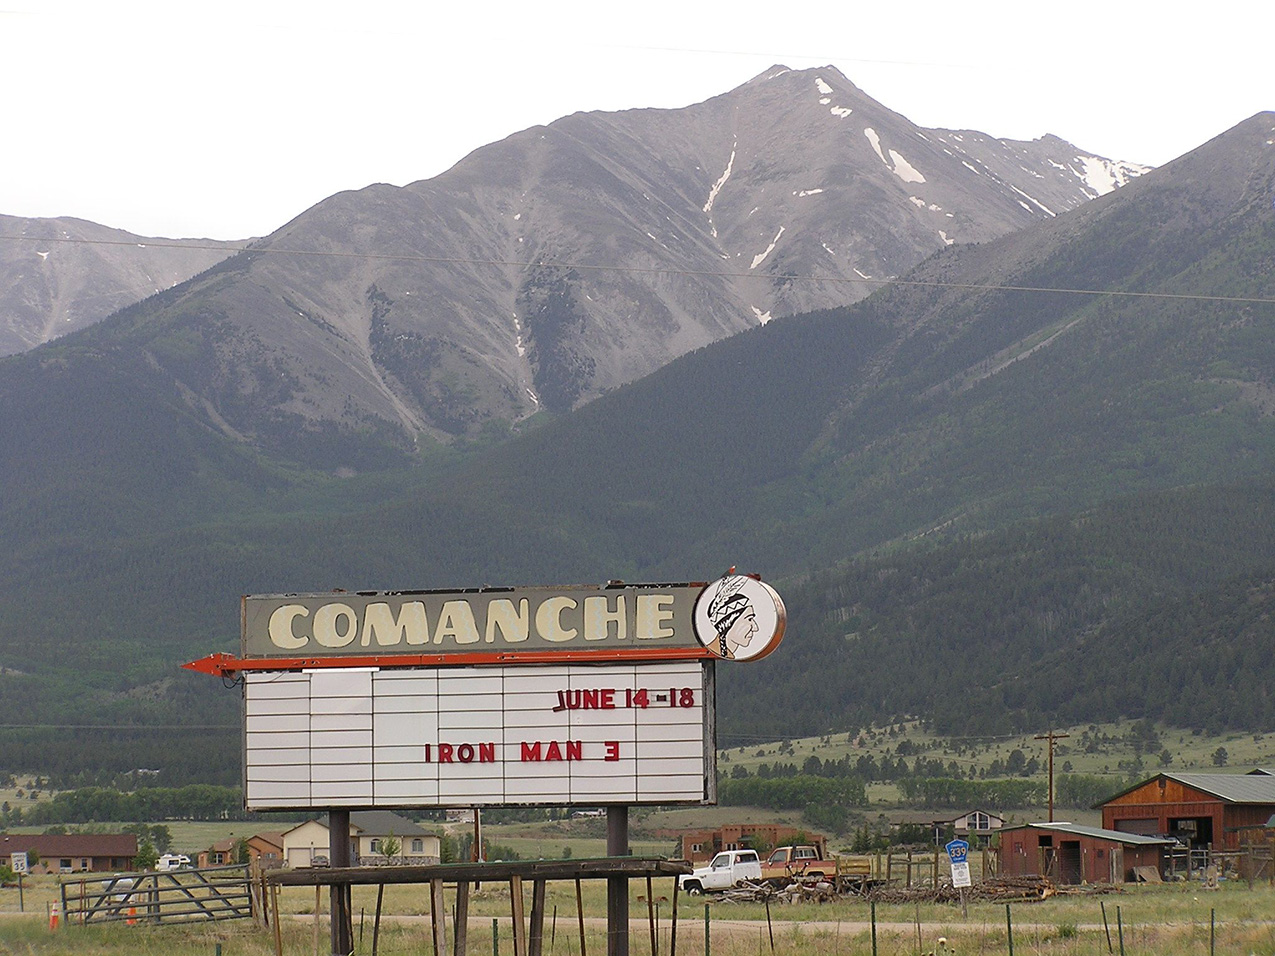 a vintage marquee sign with COMANCHE and a cartoon of a Native American man at the top displays IRON MAN 3 JUNE 14-18; behind the sign are scattered houses and junked pickup trucks dwarfed by mountains that rise suddenly from the foothills